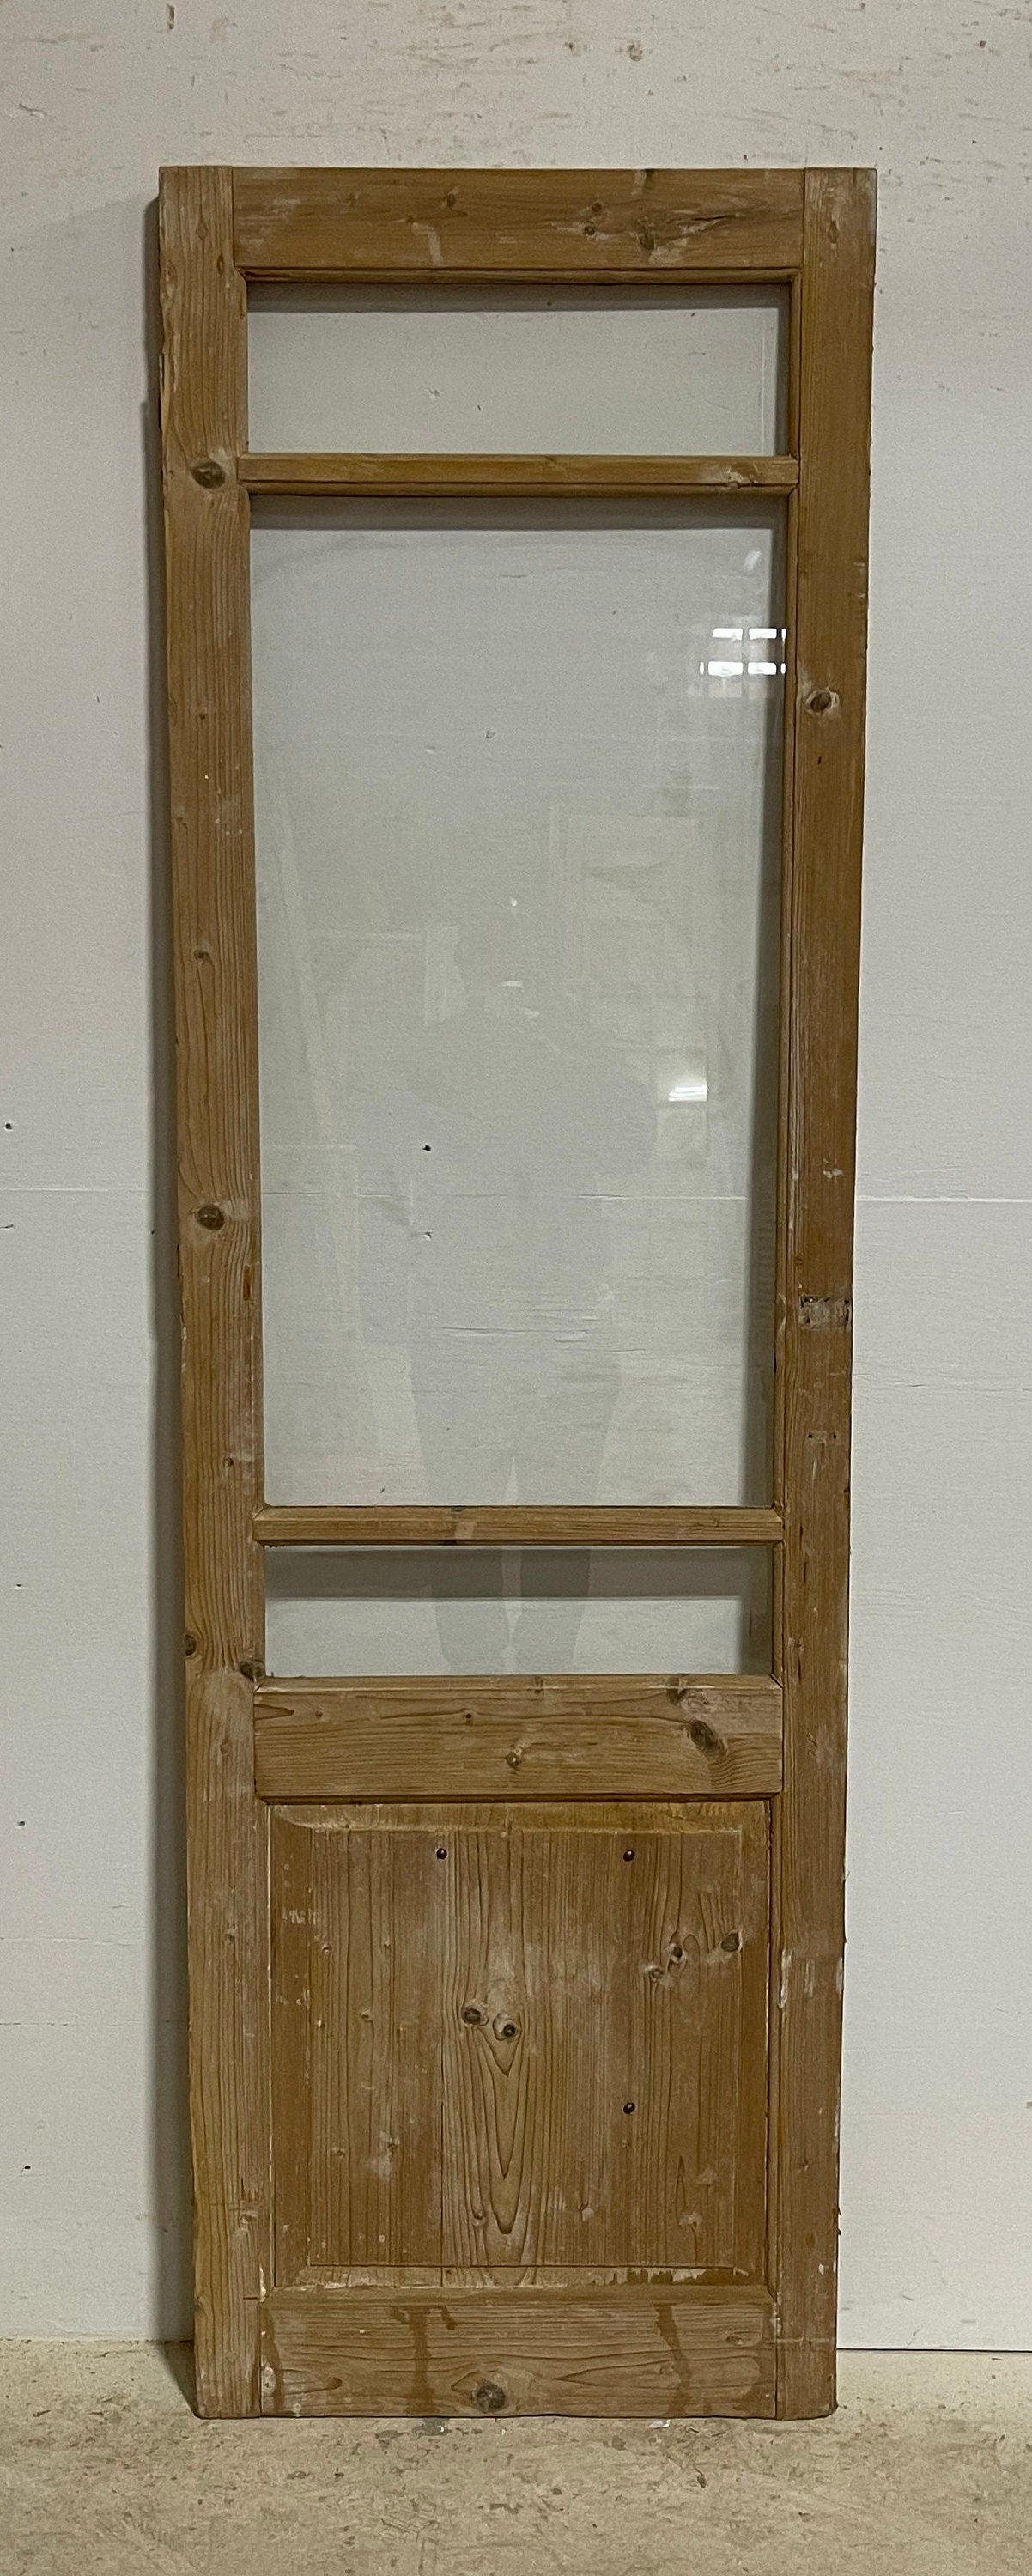 Antique French panel door with glass (85x25) G1382s